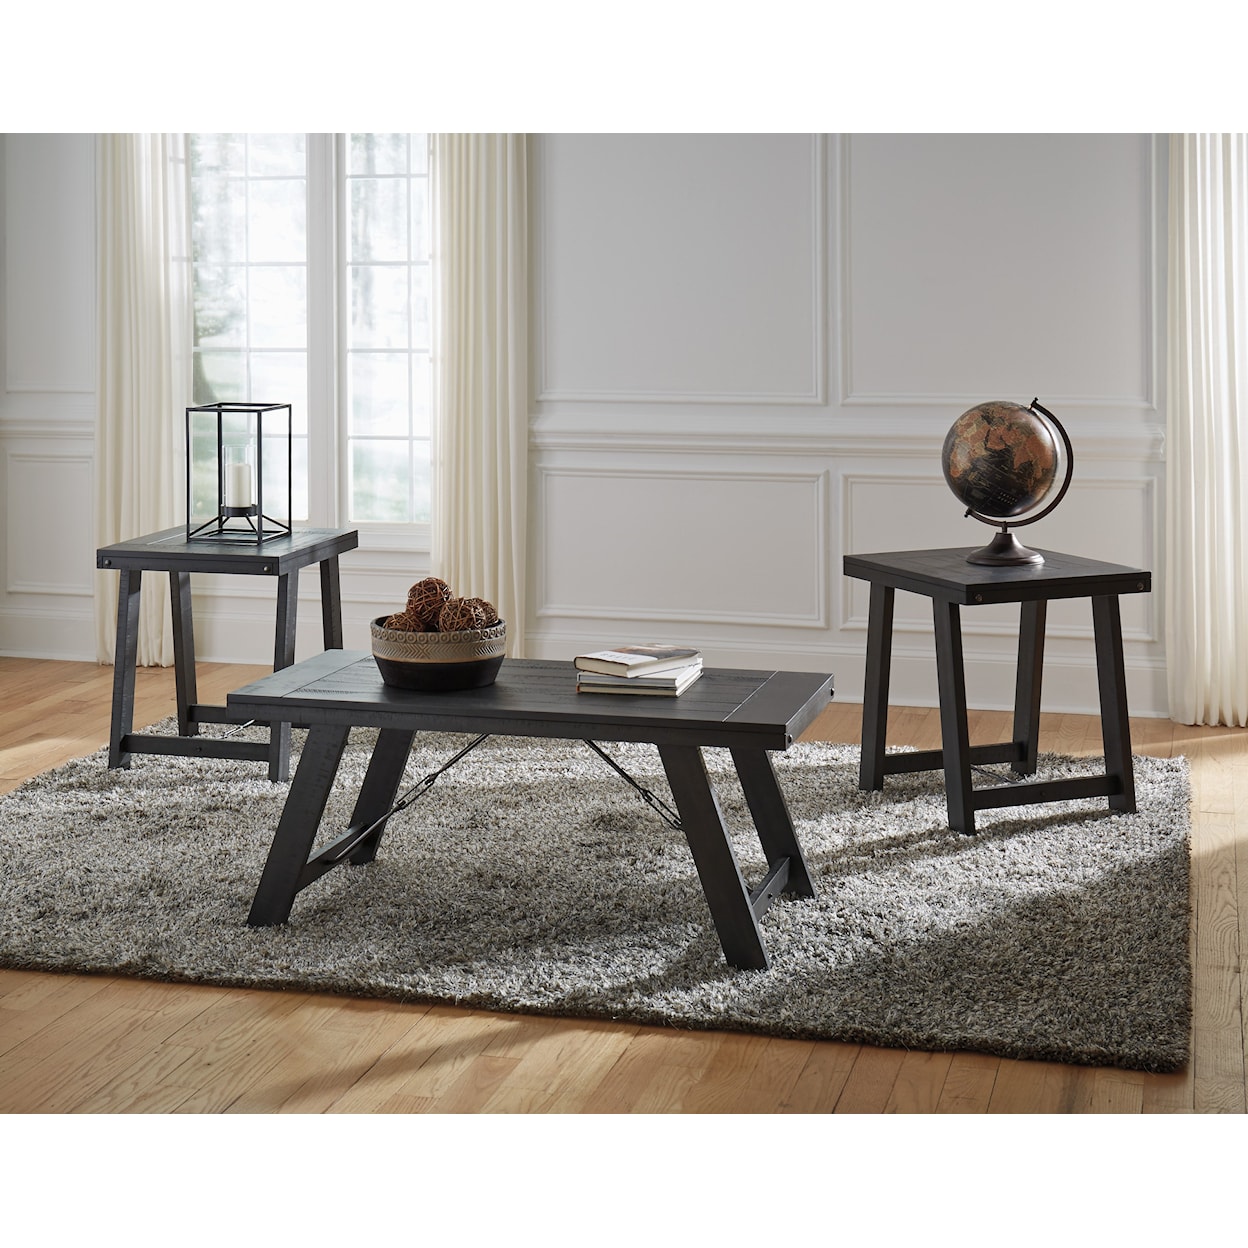 Signature Design by Ashley Noorbrook Occasional Table Group